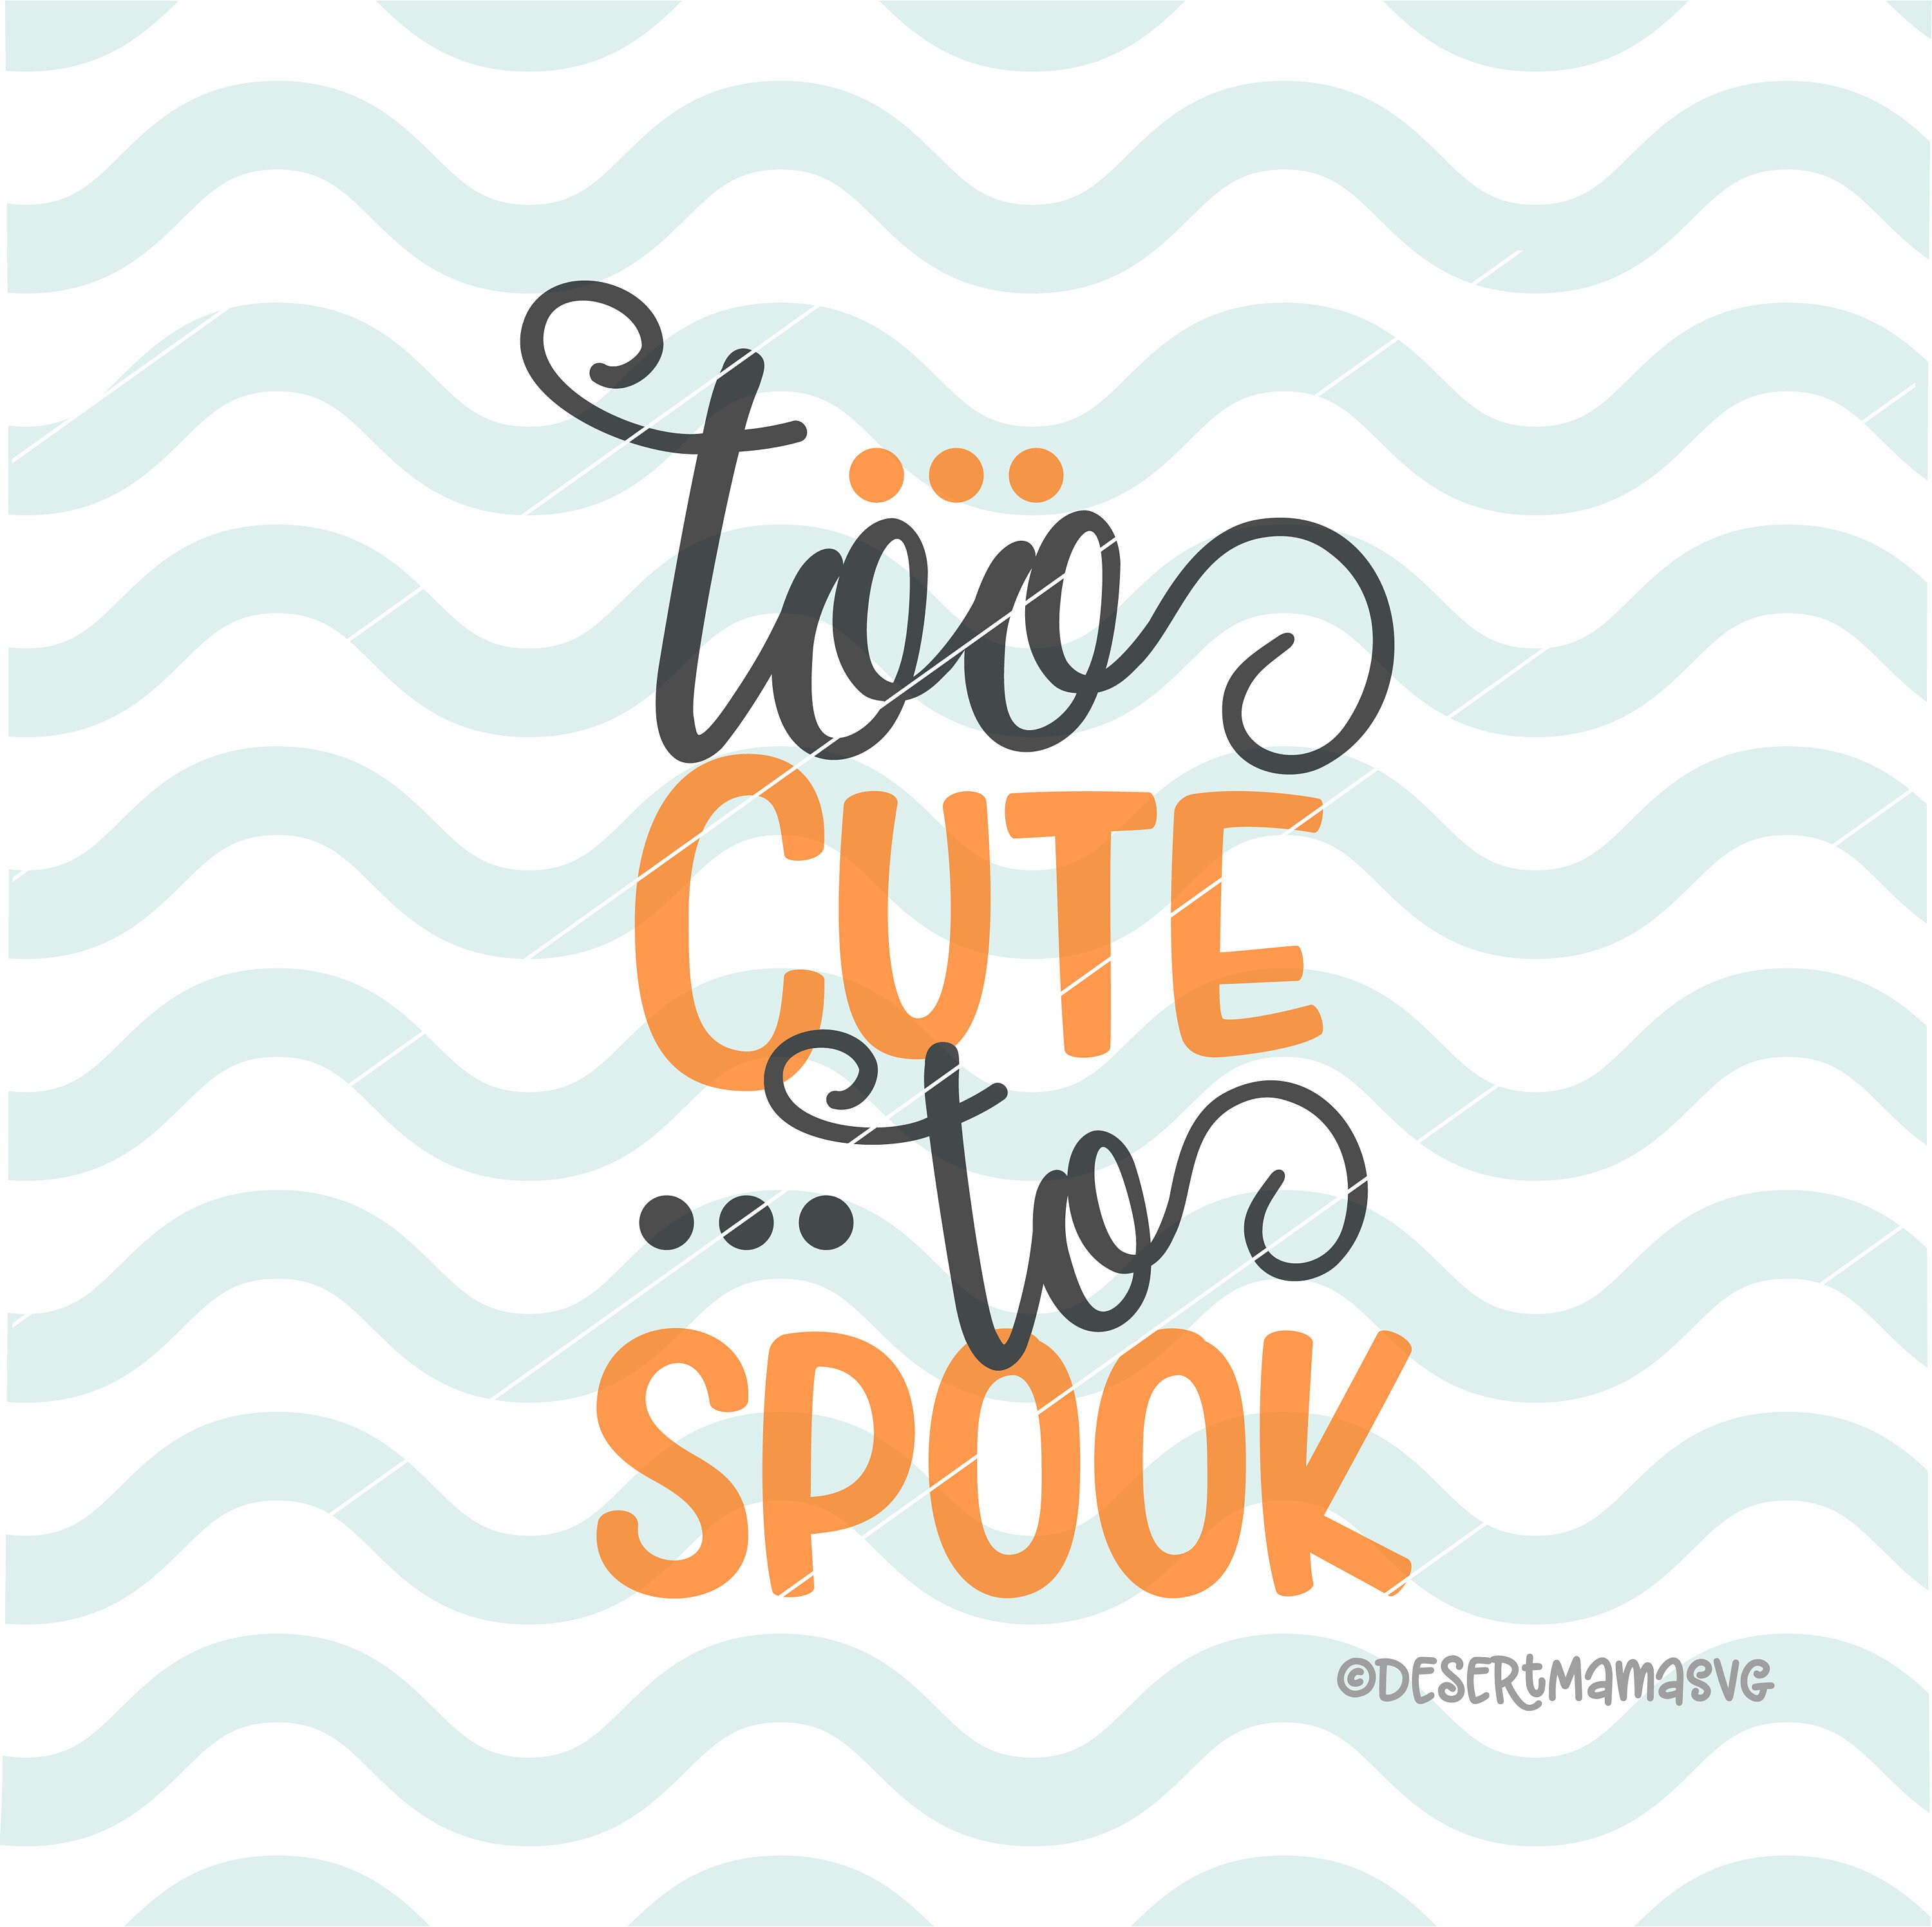 Download Too cute to spook SVG dxf png cricut cameo cut file | Etsy